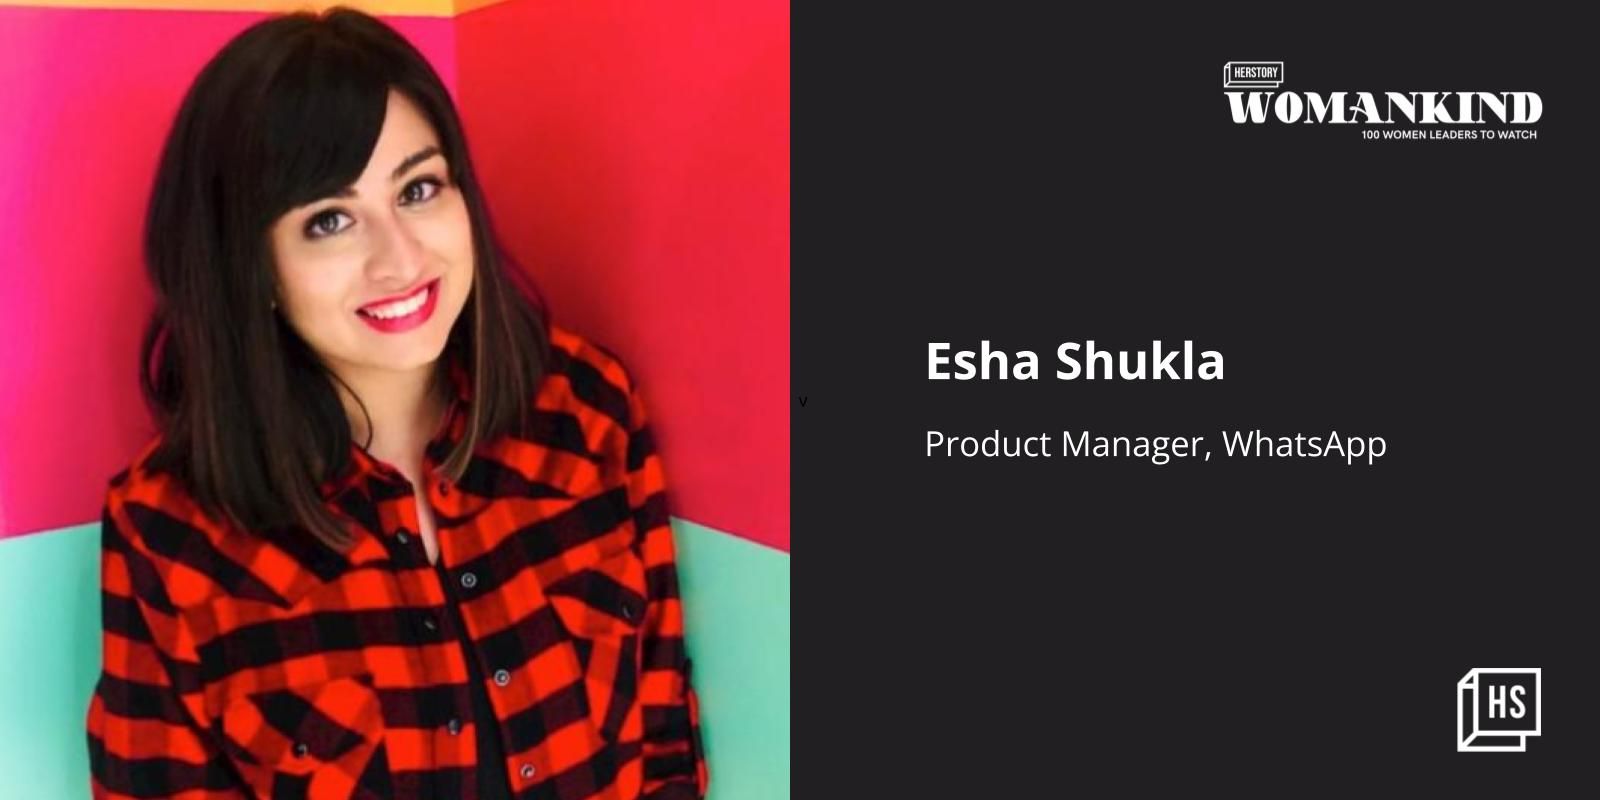 [100 Emerging Women Leaders] Meet Esha Shukla: The product manager who dreamt big and refused to give up